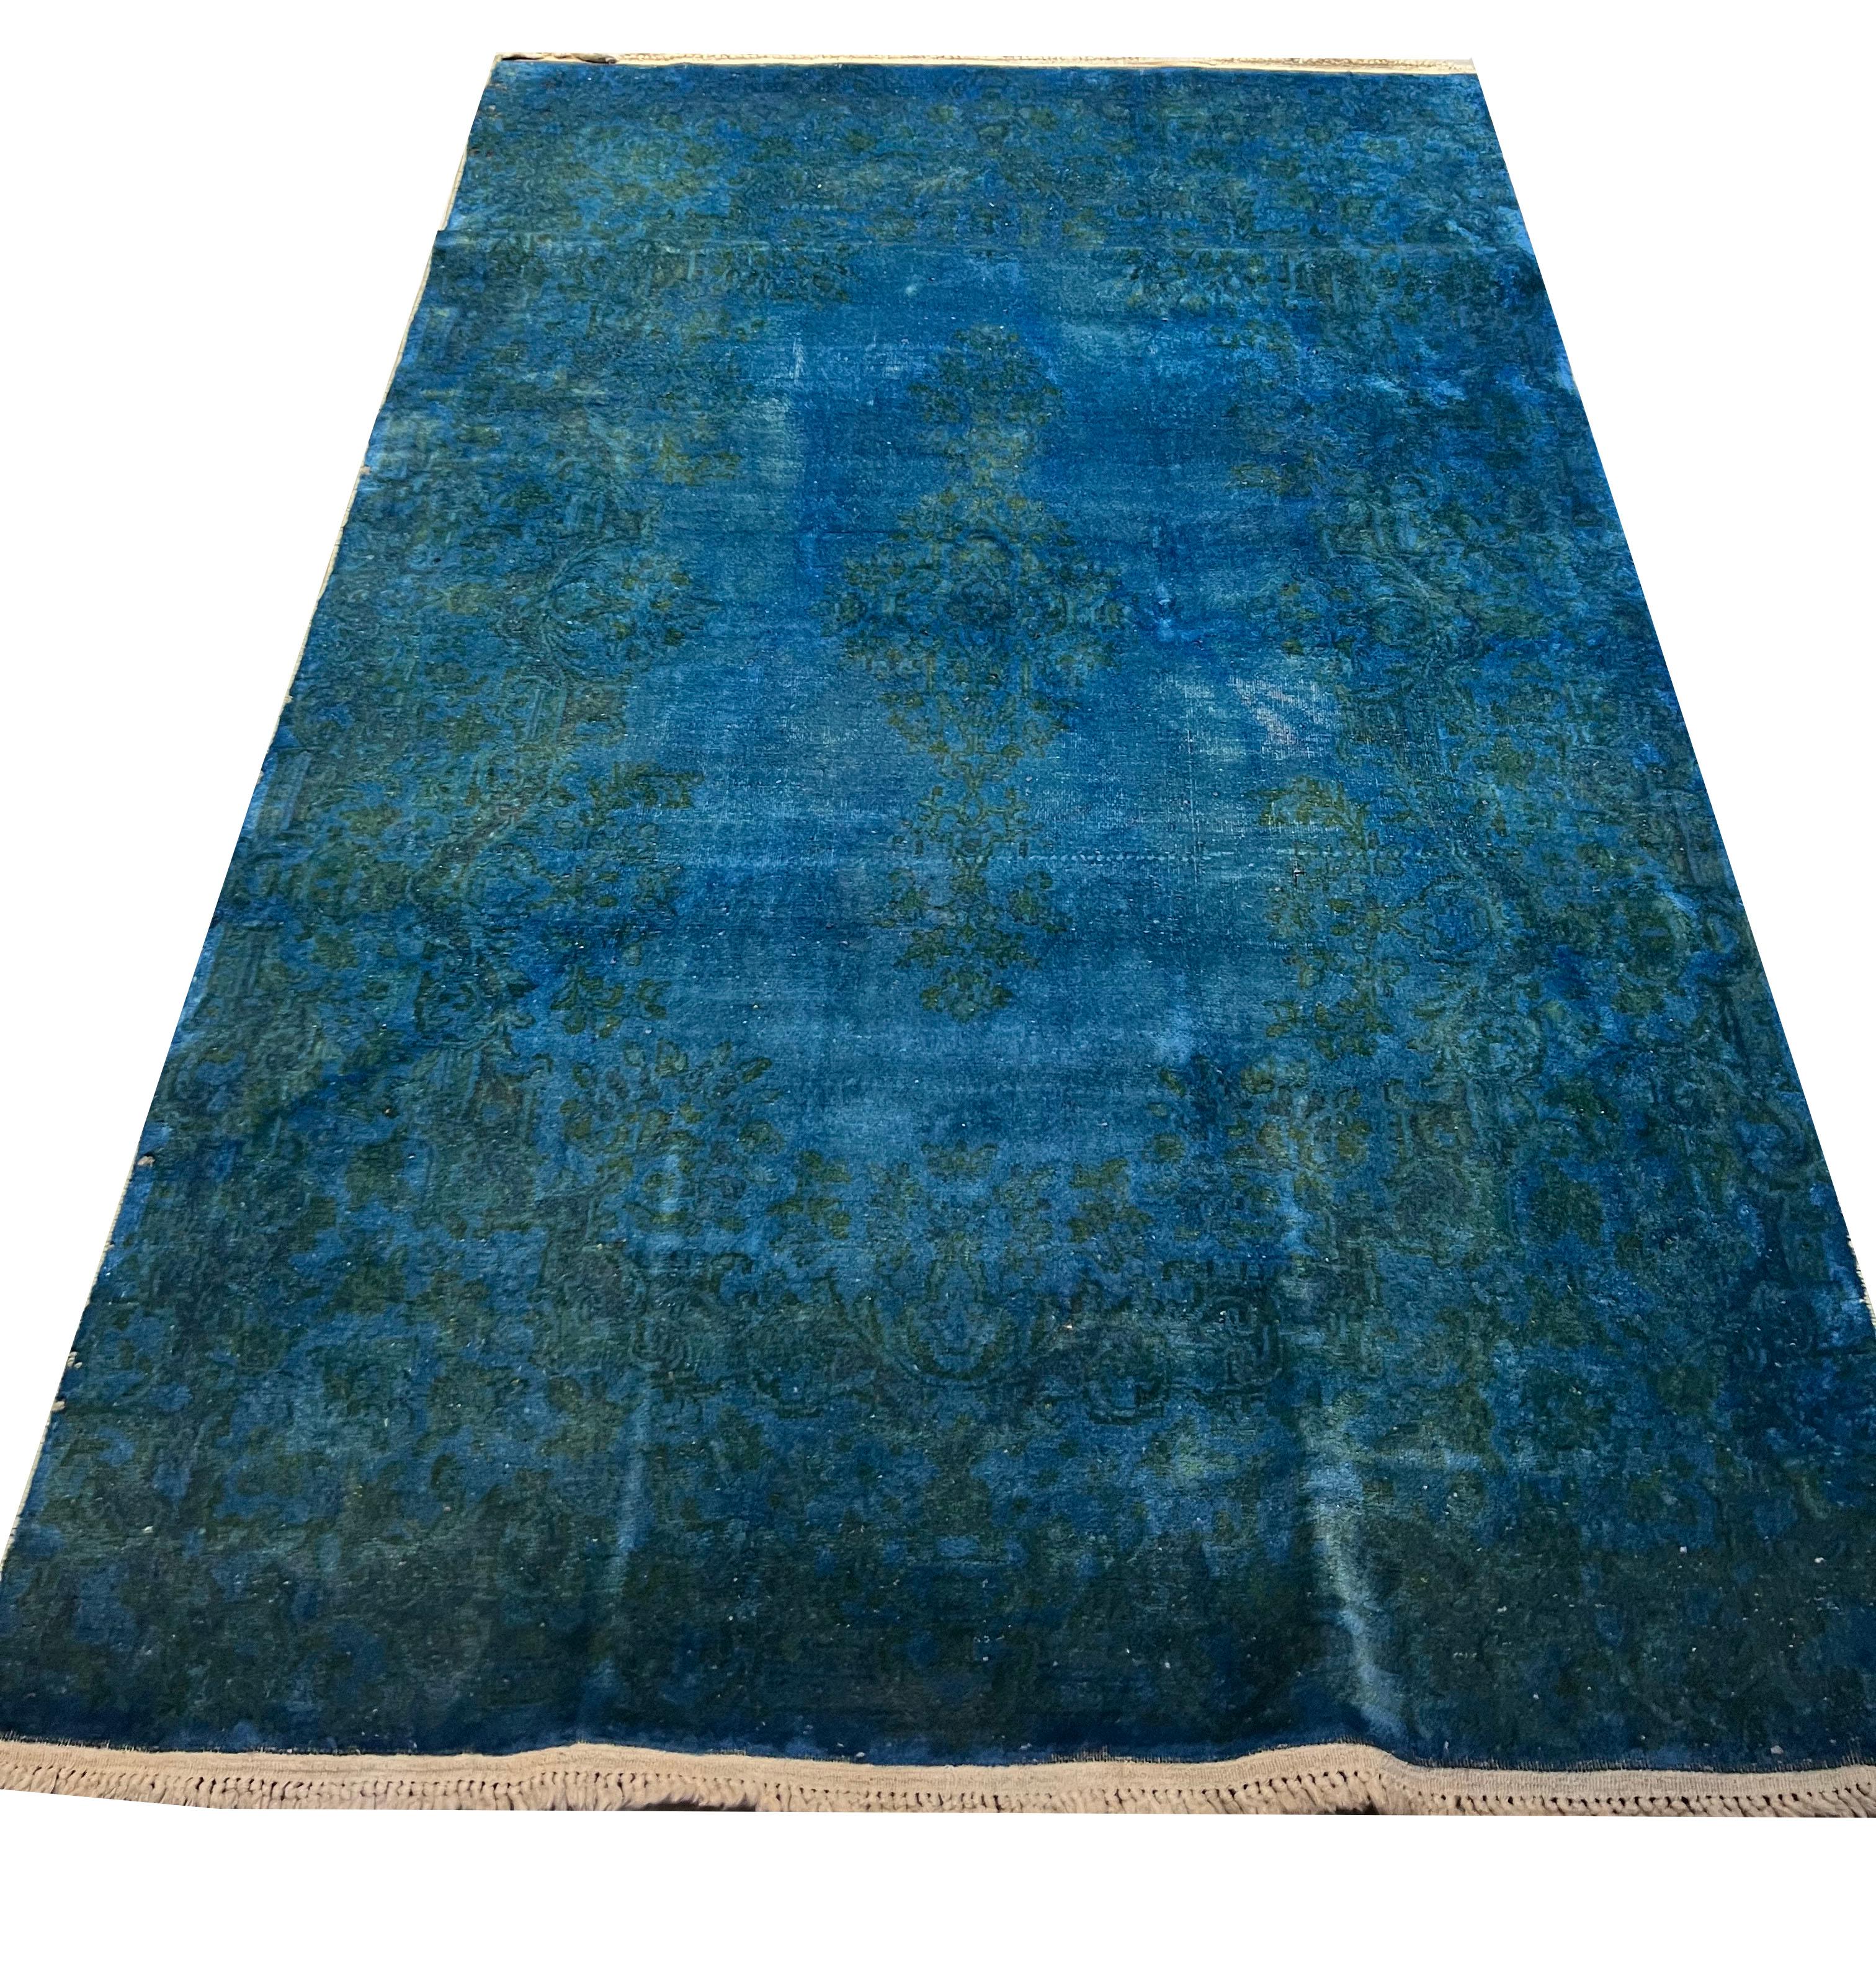 Vintage Overdyed Kirman Rug  3'9 x 5' In Good Condition For Sale In New York, NY